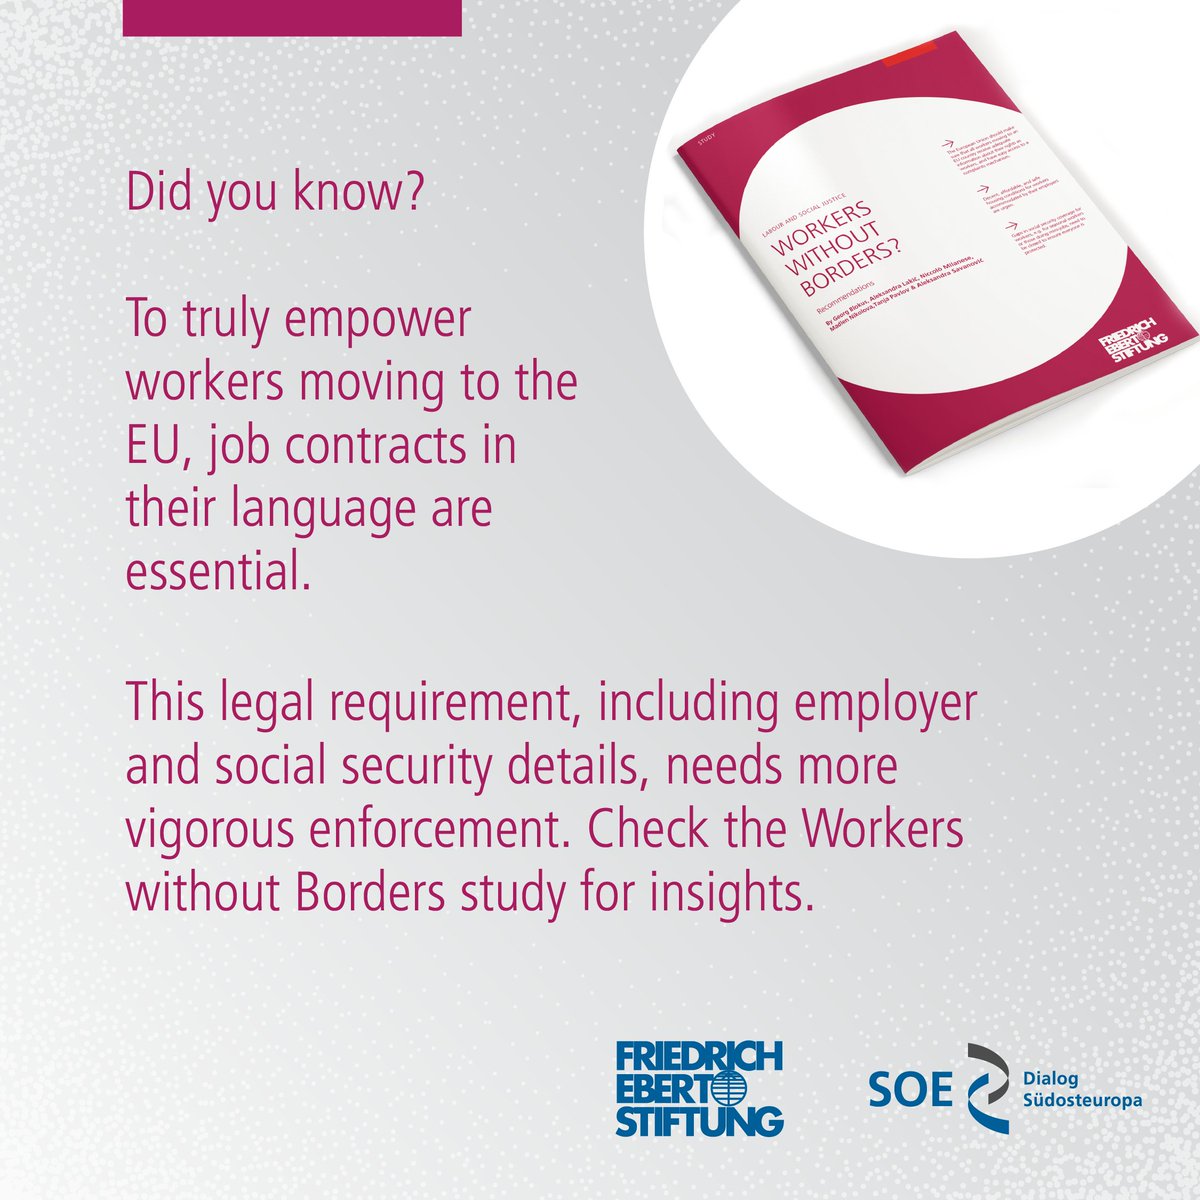 Would you sign a contract in a language you don't understand? If your answer is no, you also understand the problem of workers migrating to the EU. For more information, please take a look at our Workers without Borders report: library.fes.de/pdf-files/buer…